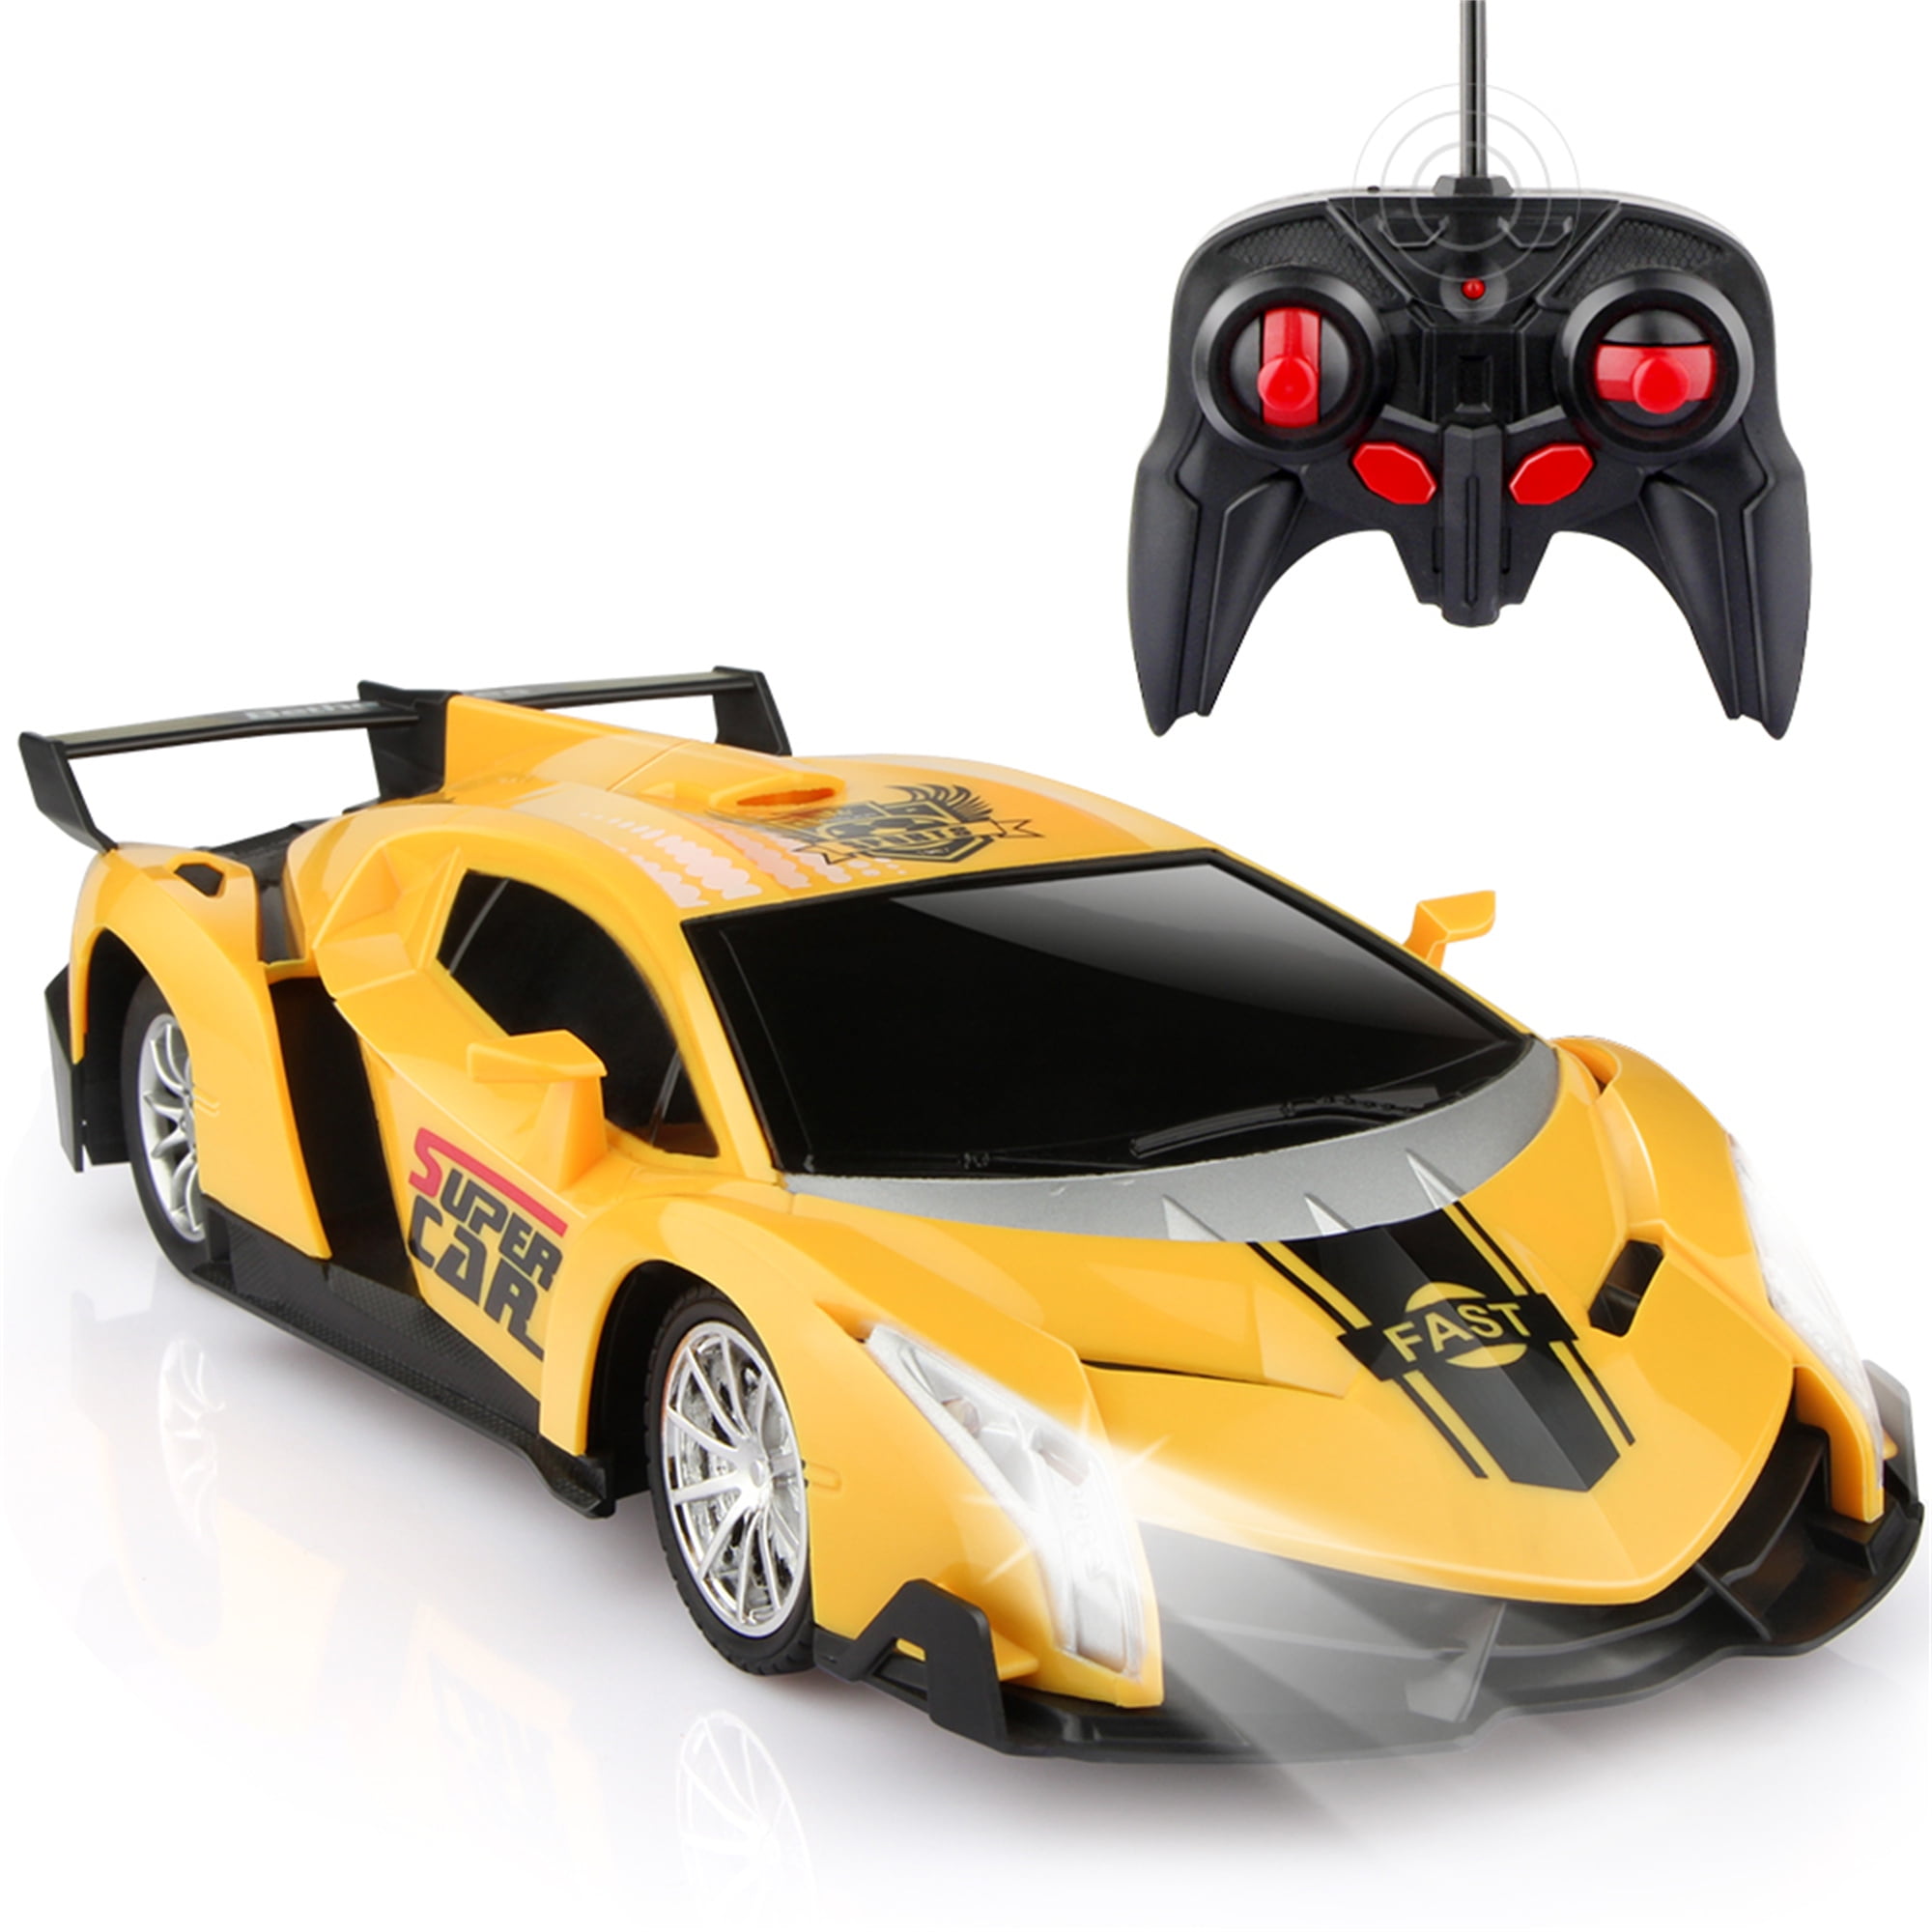 Wupuaait 1/18 RC Lamborghini Electric Sport Racing Remote Control Car Toys  for 3-12 Years Old Kids, Yellow (Batteries Not Included) 